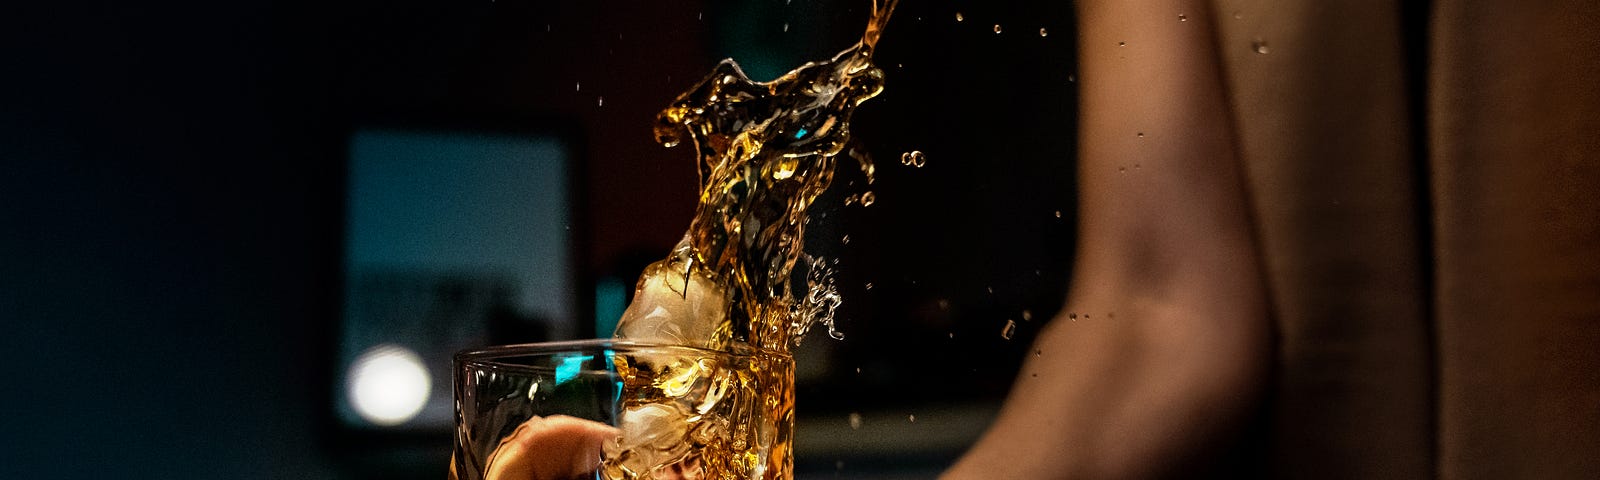 An arm extends down from the upper right to hold a medium-sized glass. Alcohol pours from above, splashing amber-colored fluid into the glass (with some spilling out).